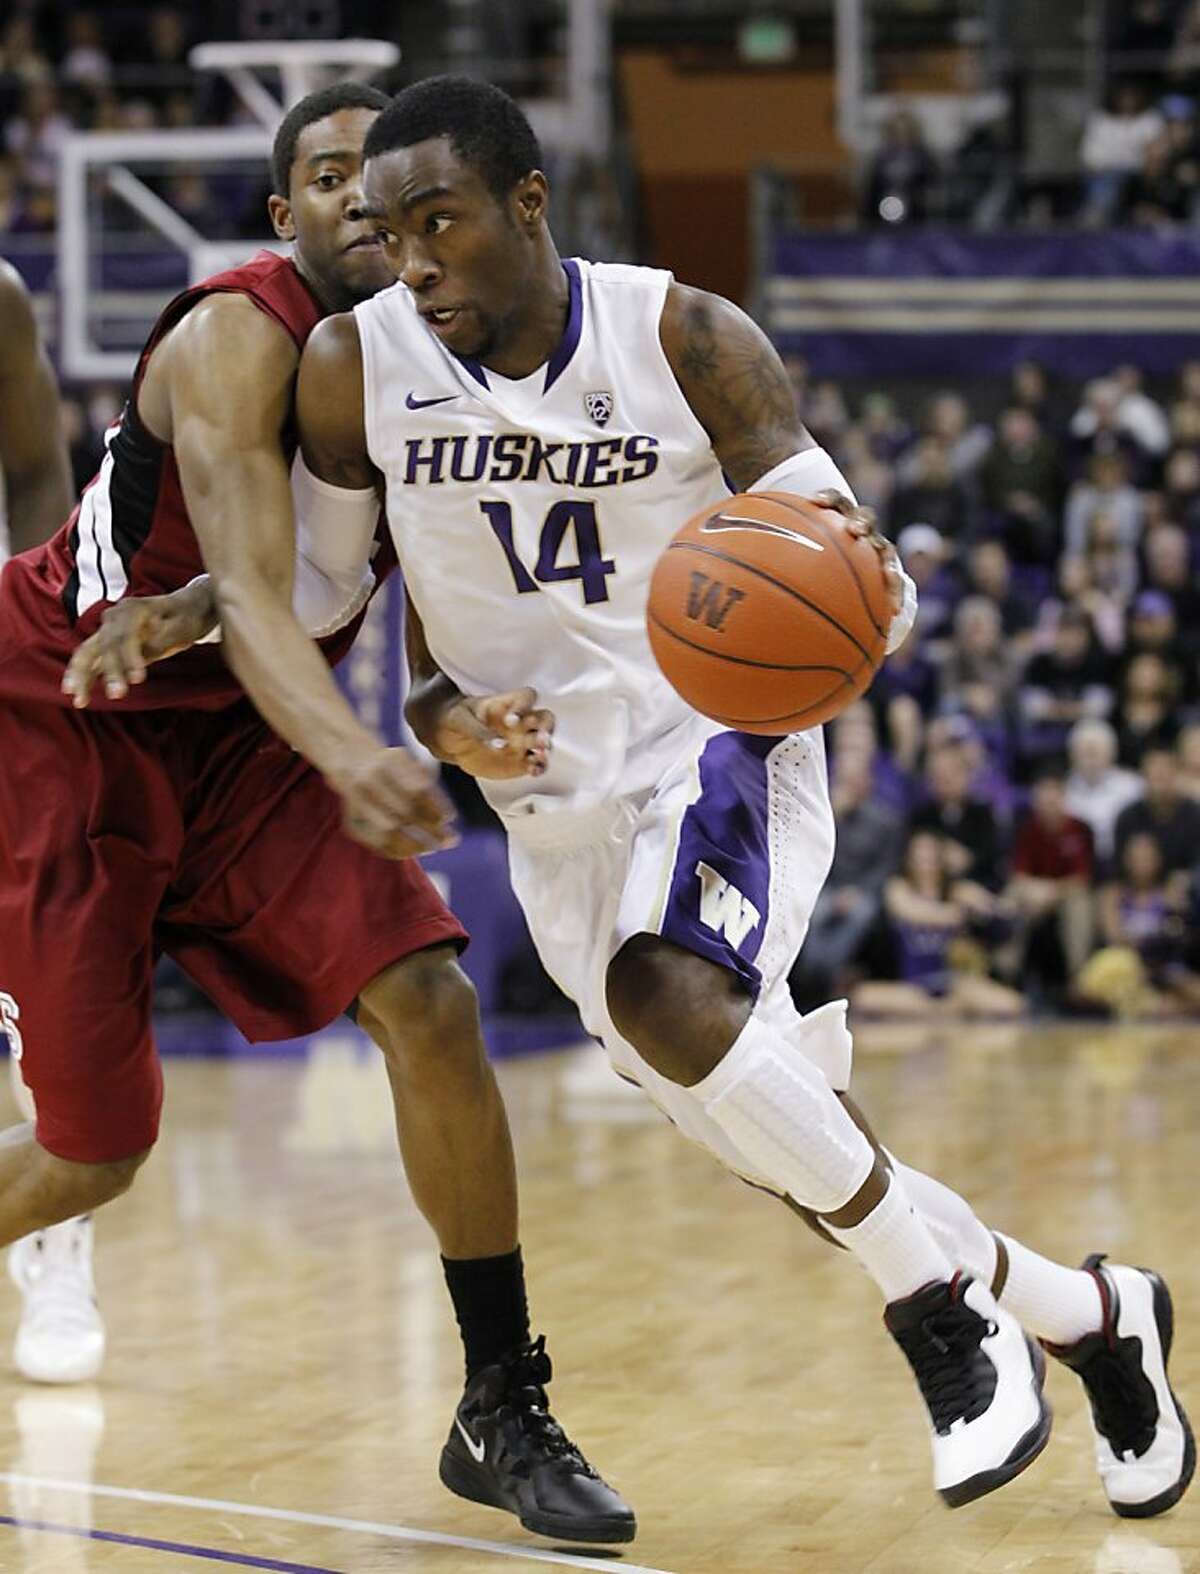 Washington's Tony Wroten (14) drives by Stanford's Chasson Randle in the second half of an NCAA college basketball game on Saturday, Jan. 21, 2012, in Seattle. Washington won 76-63. (AP Photo/Elaine Thompson)